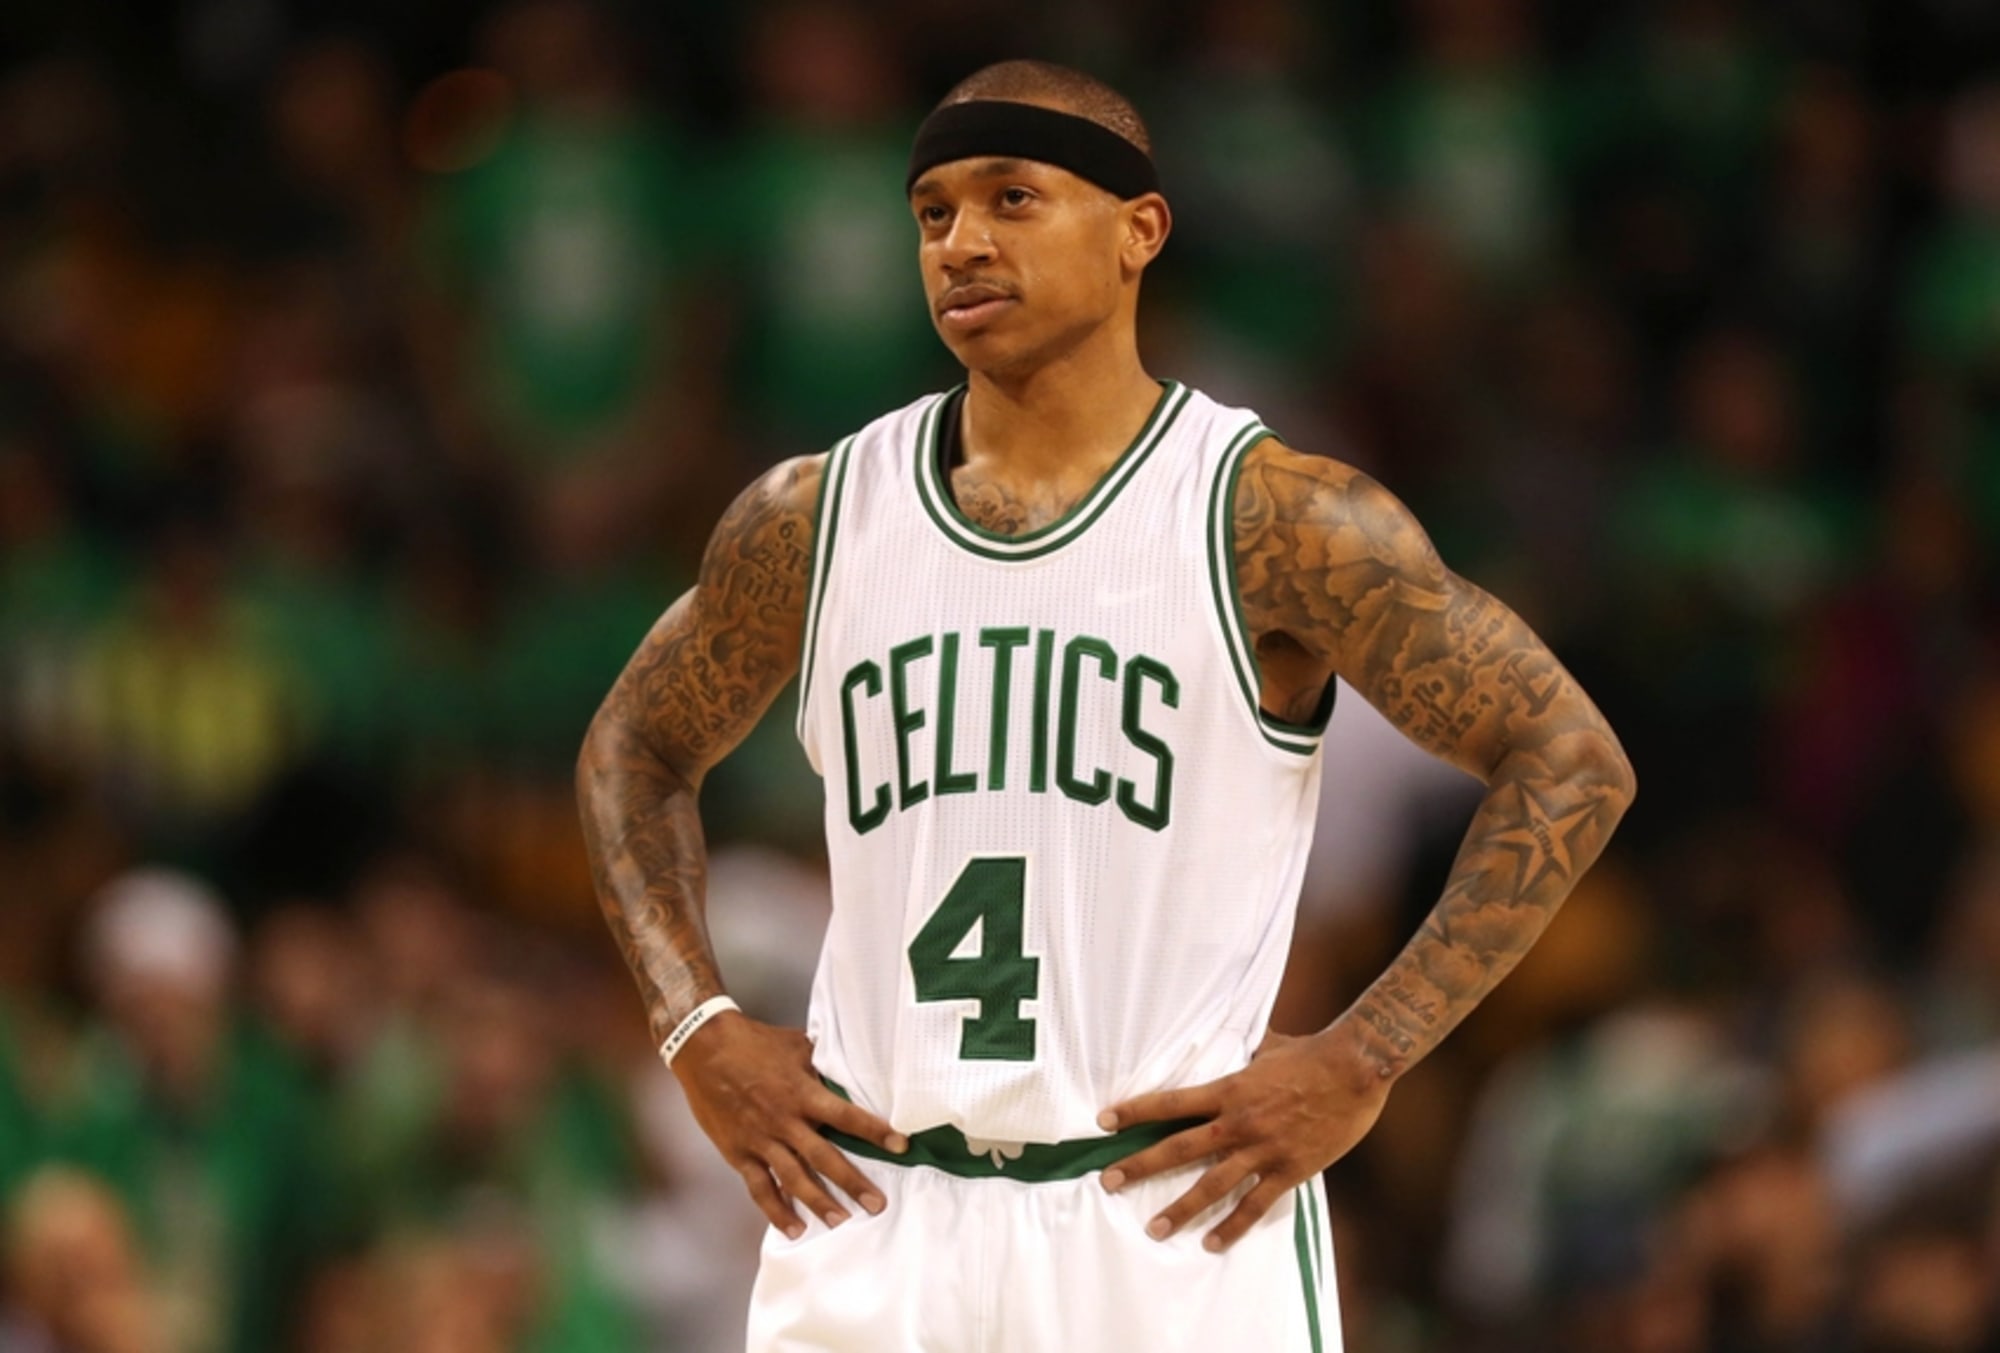 Isaiah Thomas of the Boston Celtics warms up during the game against